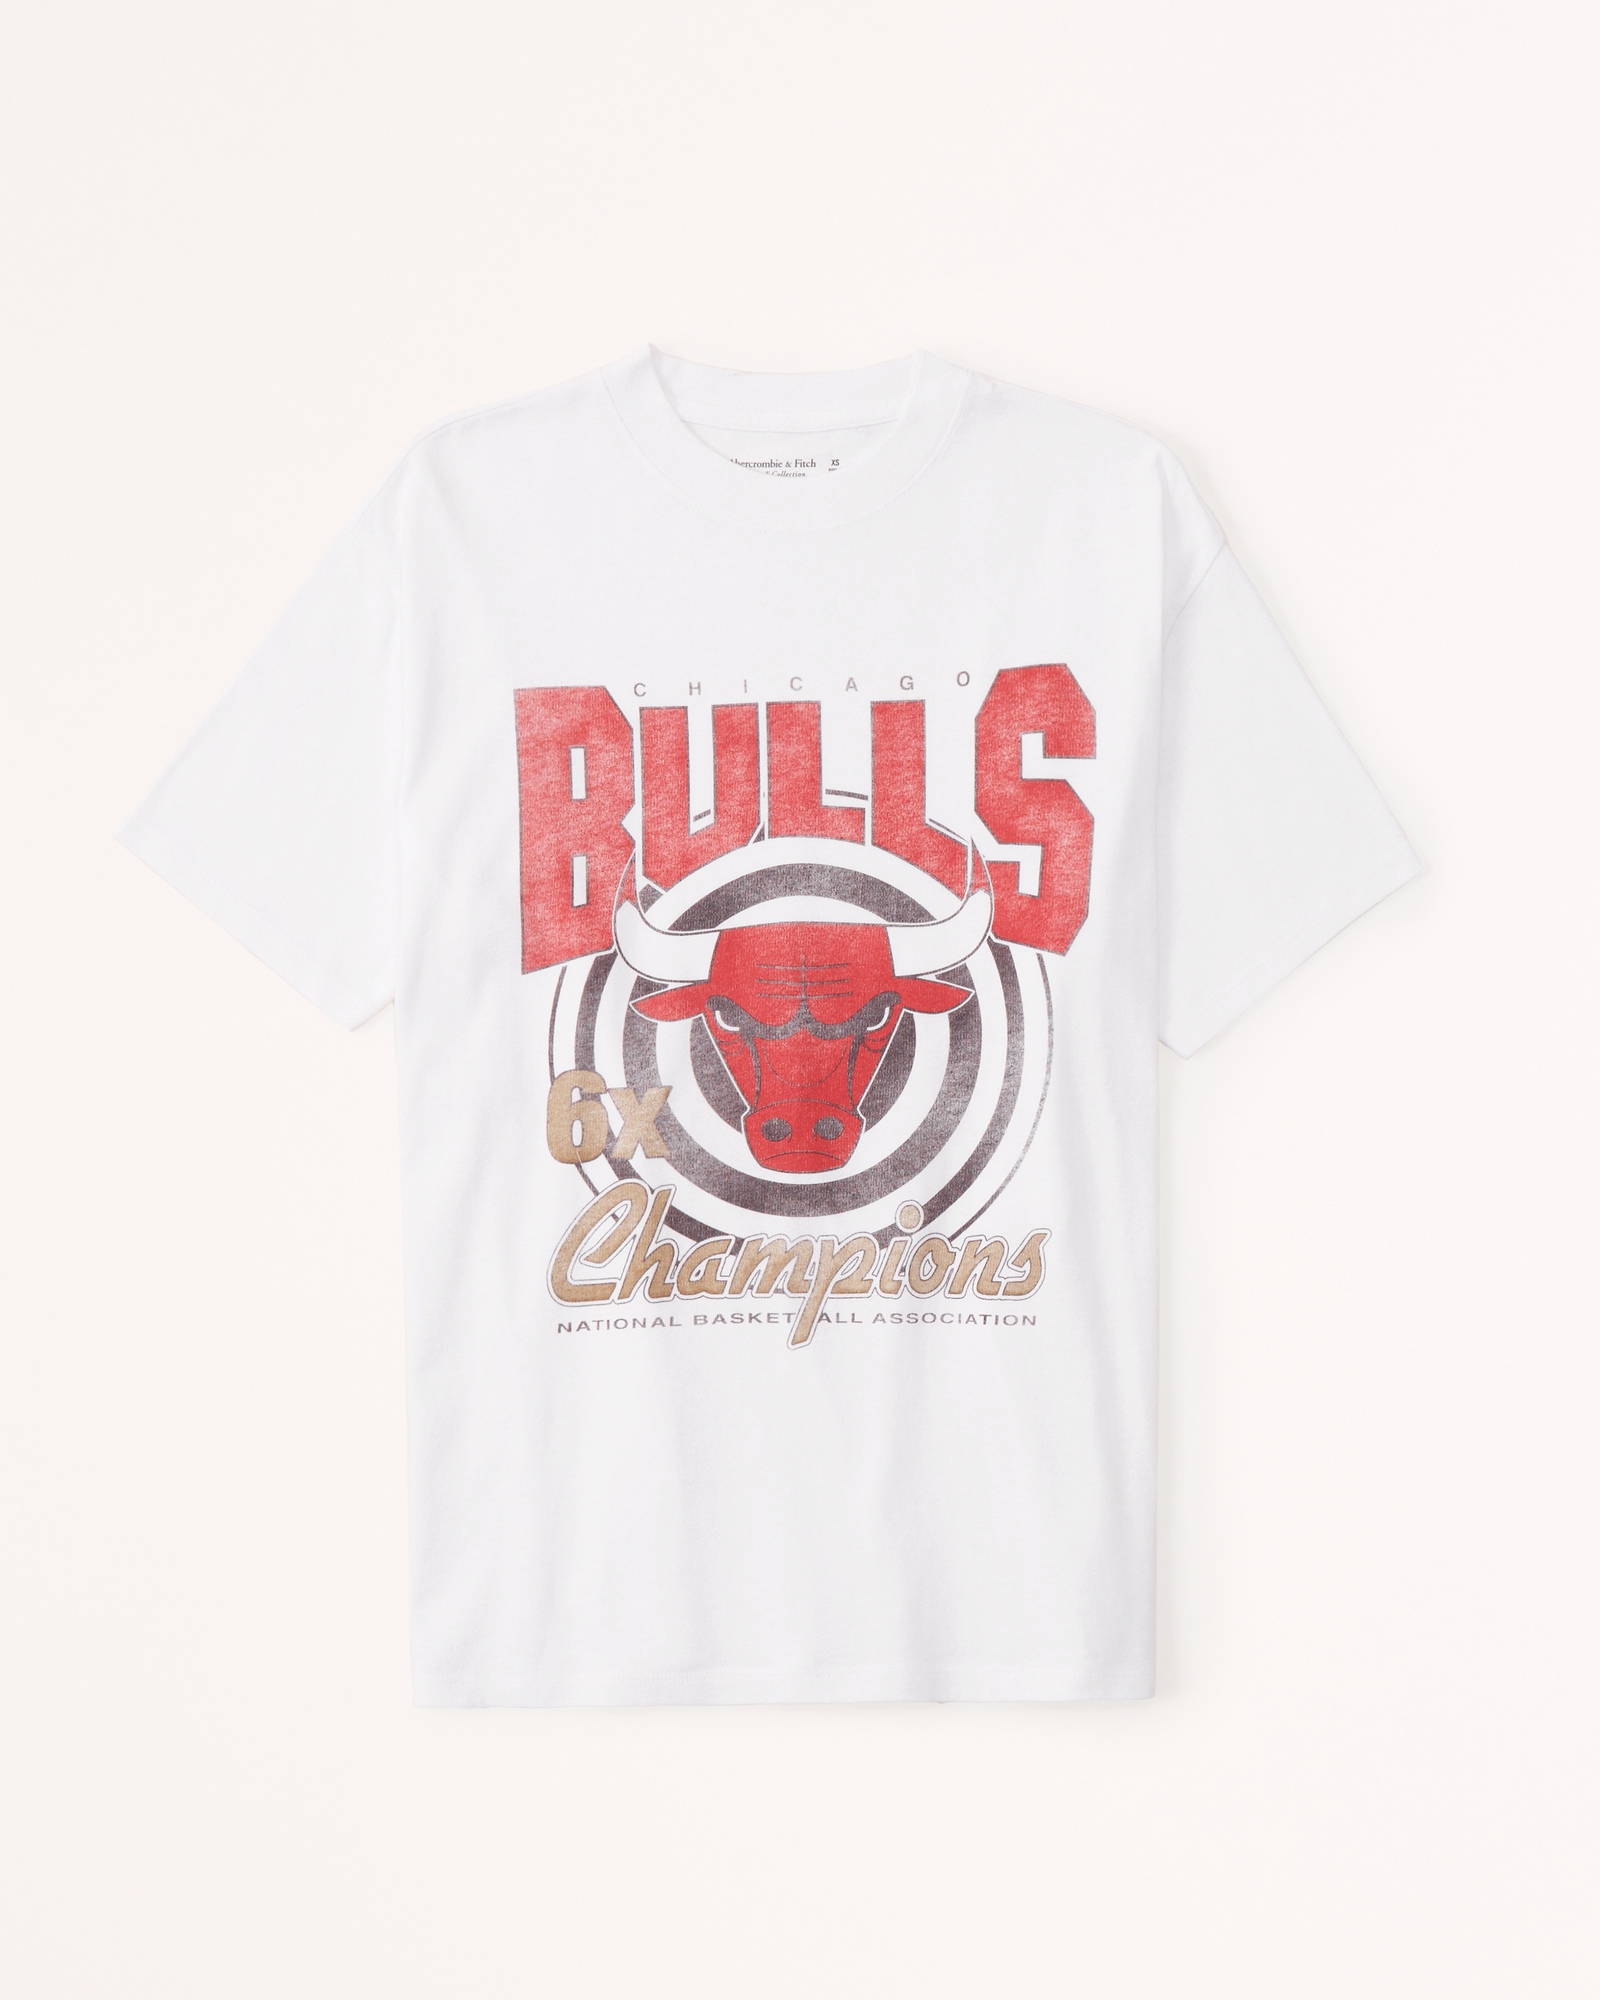 2 3 chicago bulls jersey, detailed cloth texture and